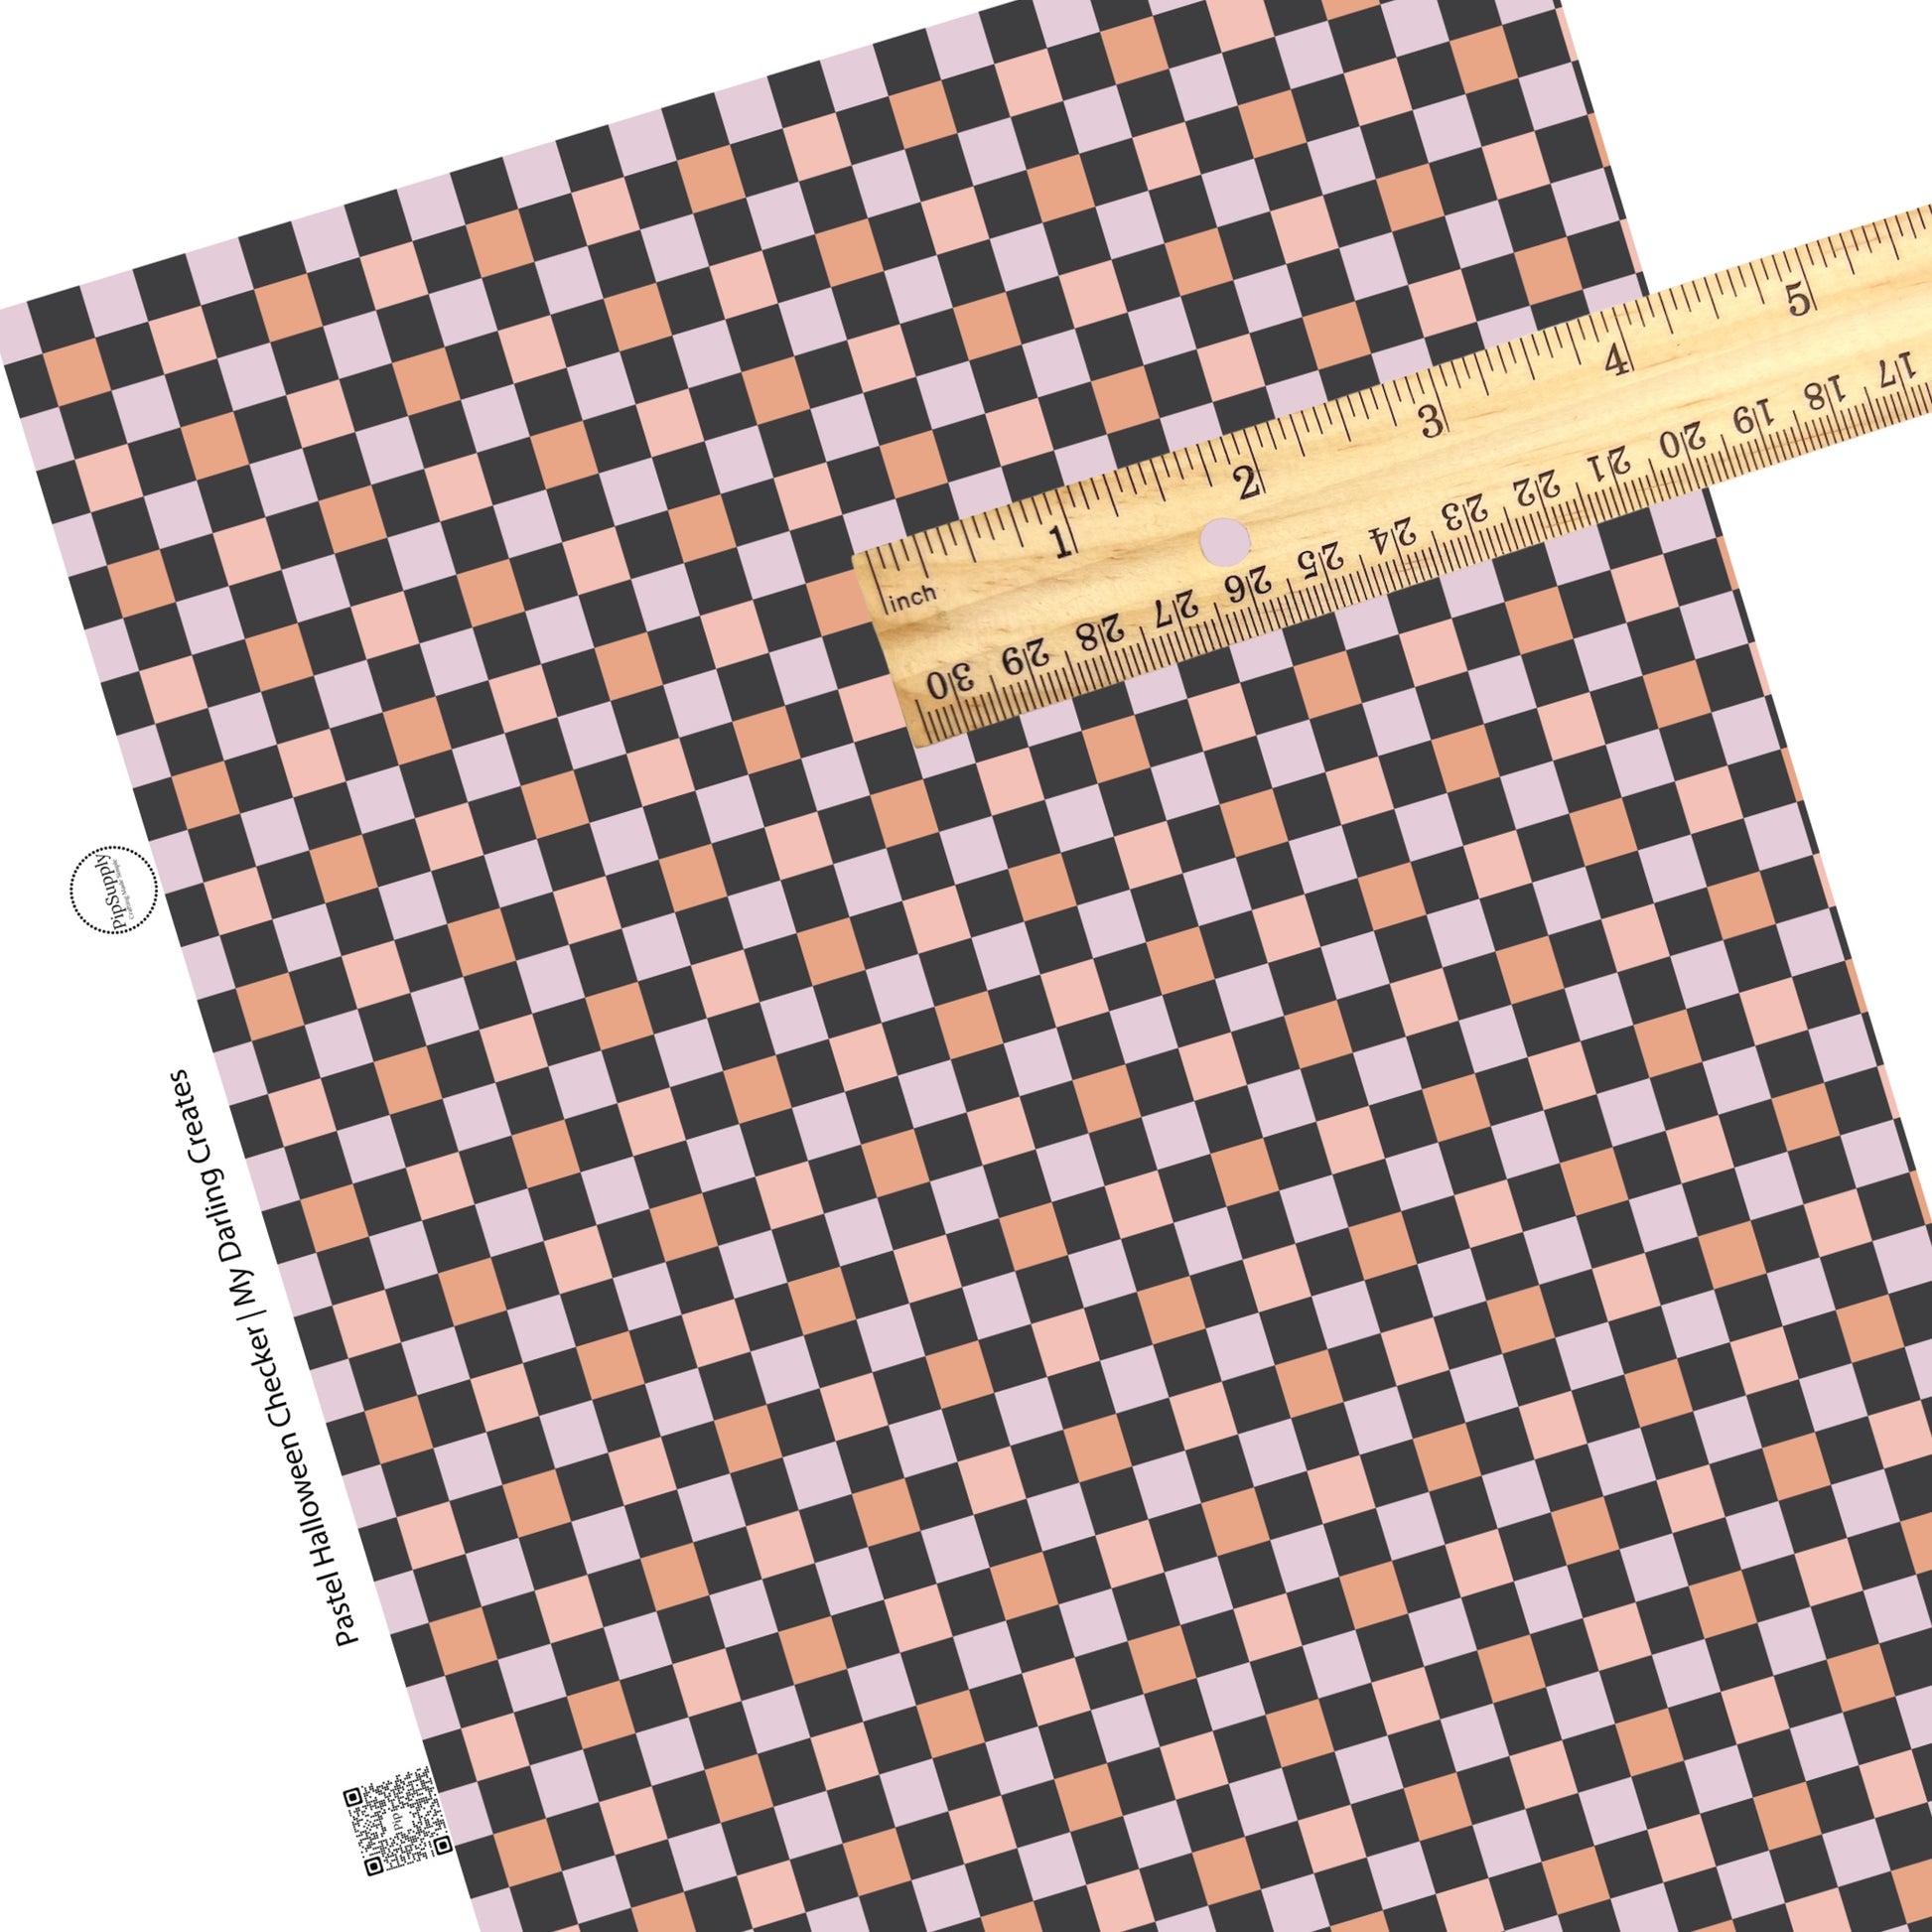 Halloween checker with pink, orange, purple, and black tiles faux leather sheets